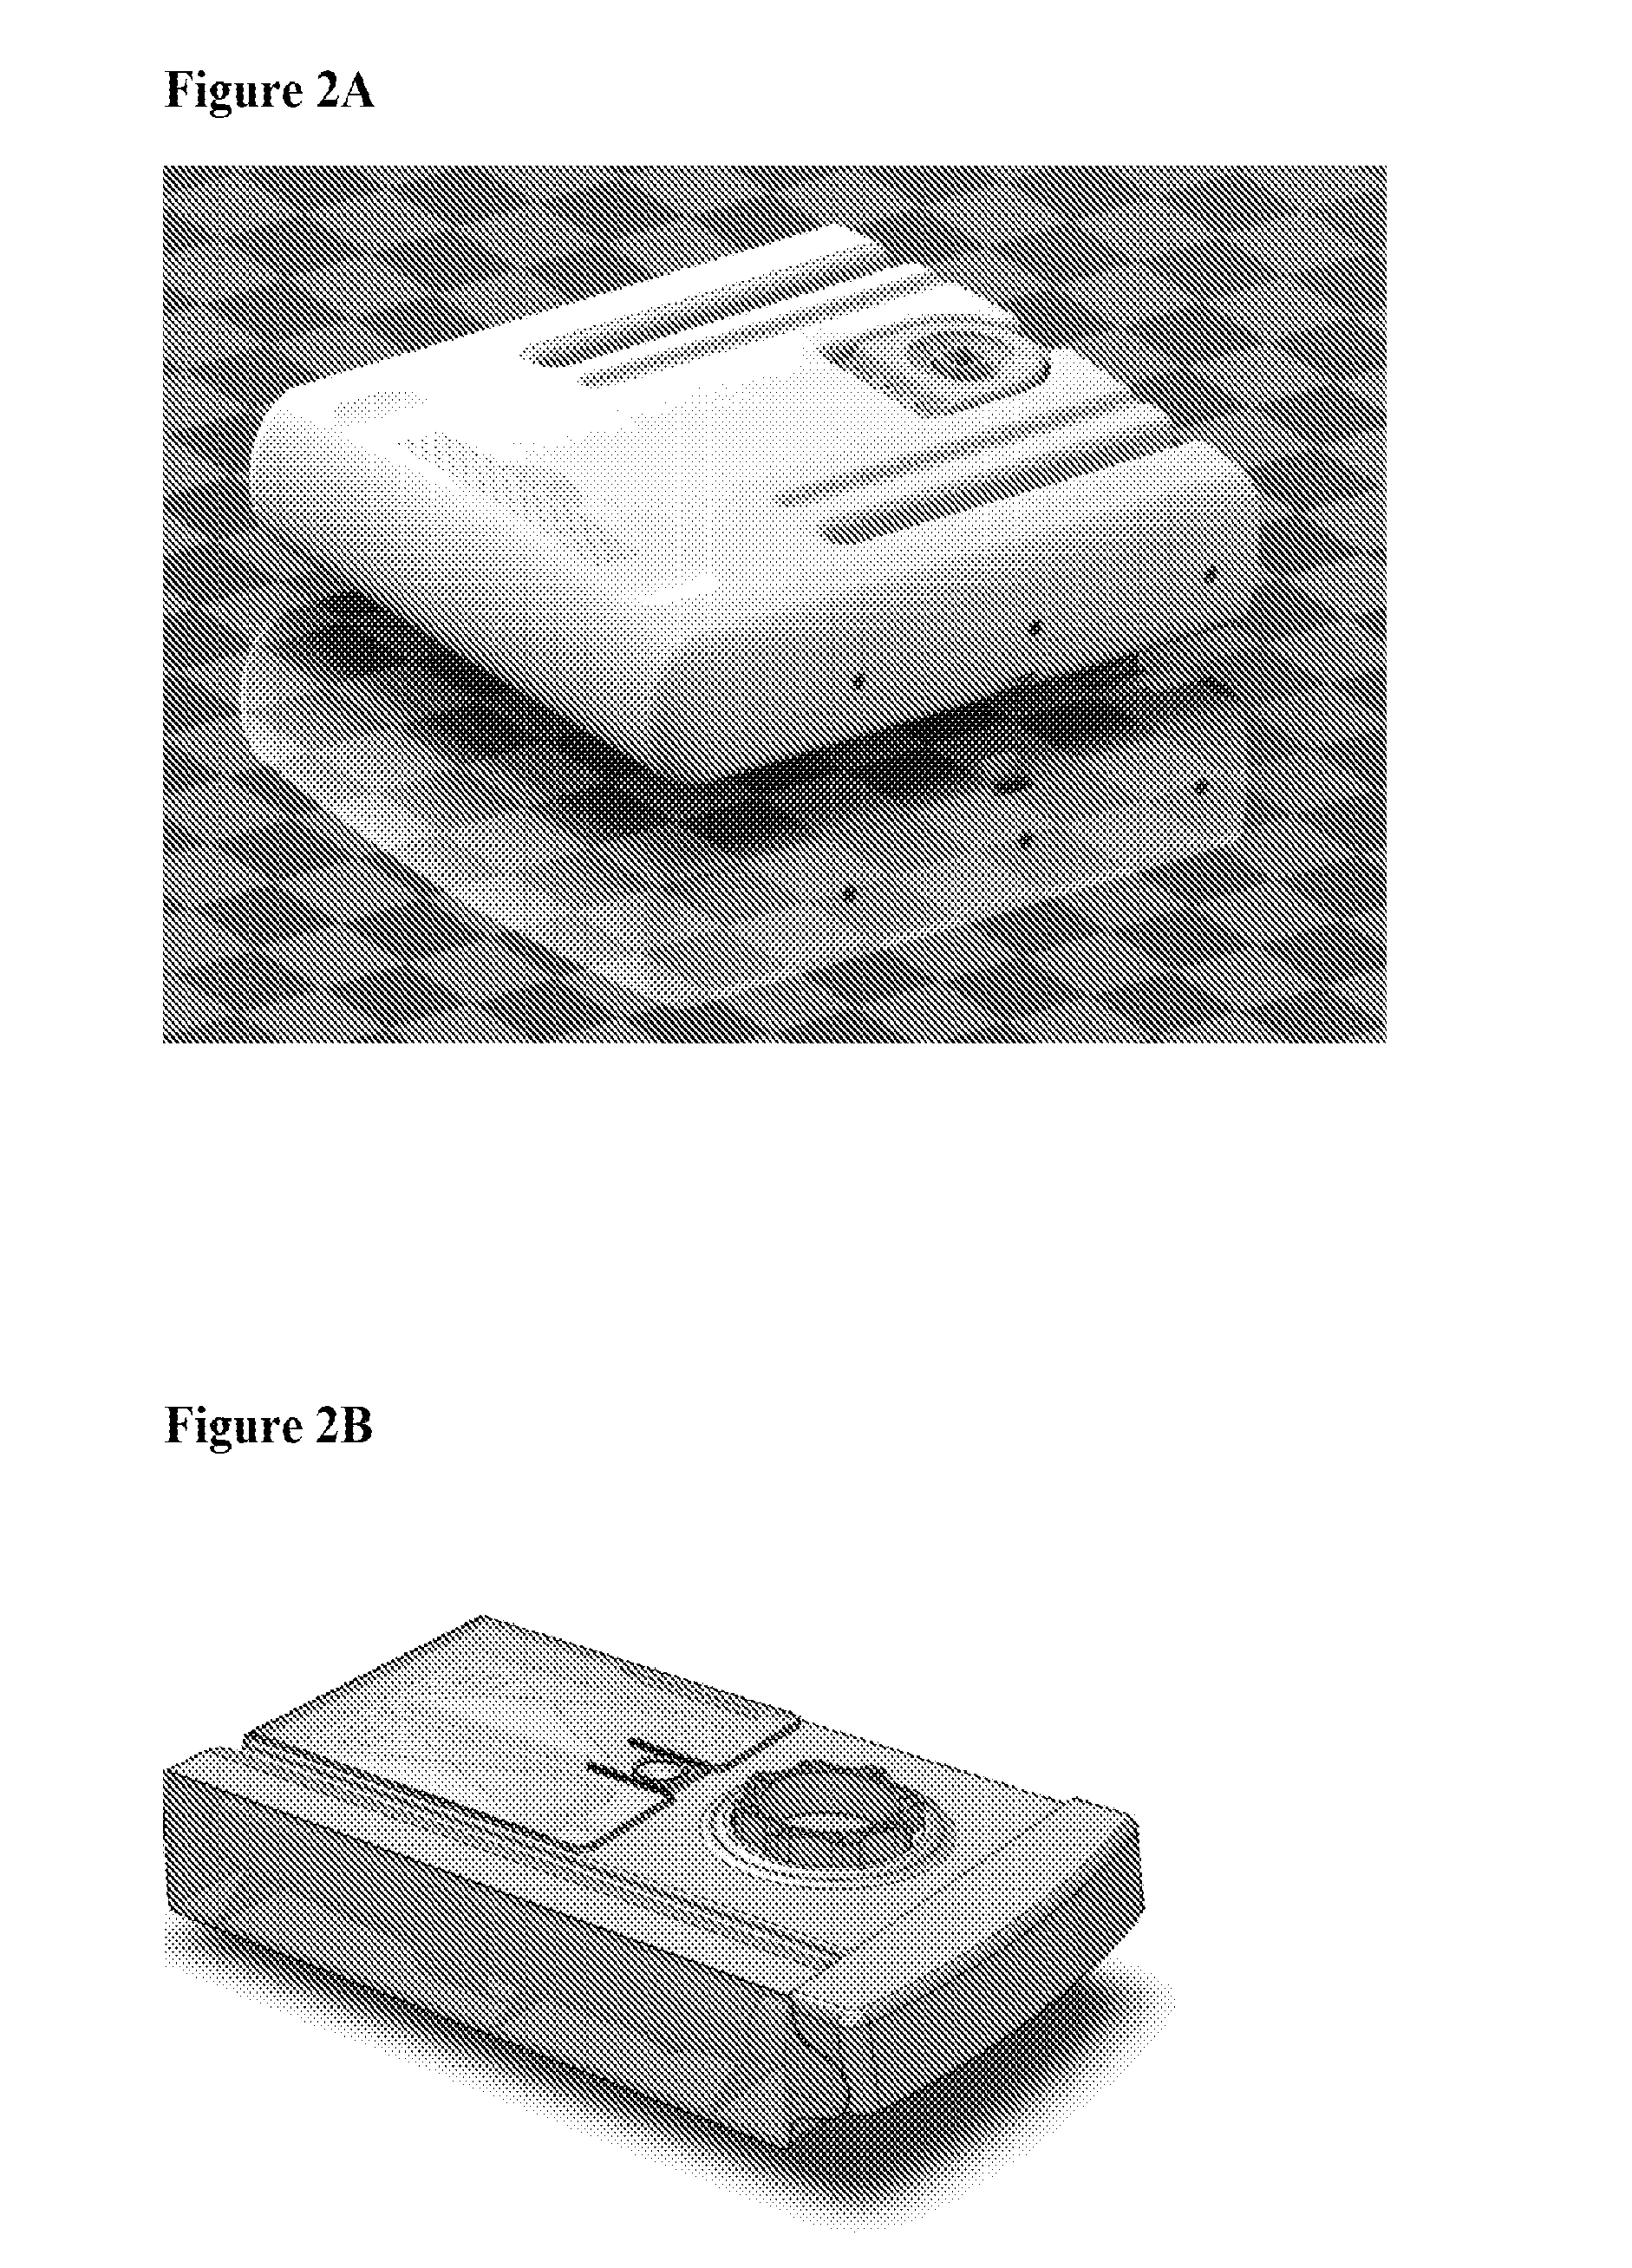 Systems and Methods for Tissue Processing and Preparation of Cell Suspension Therefrom